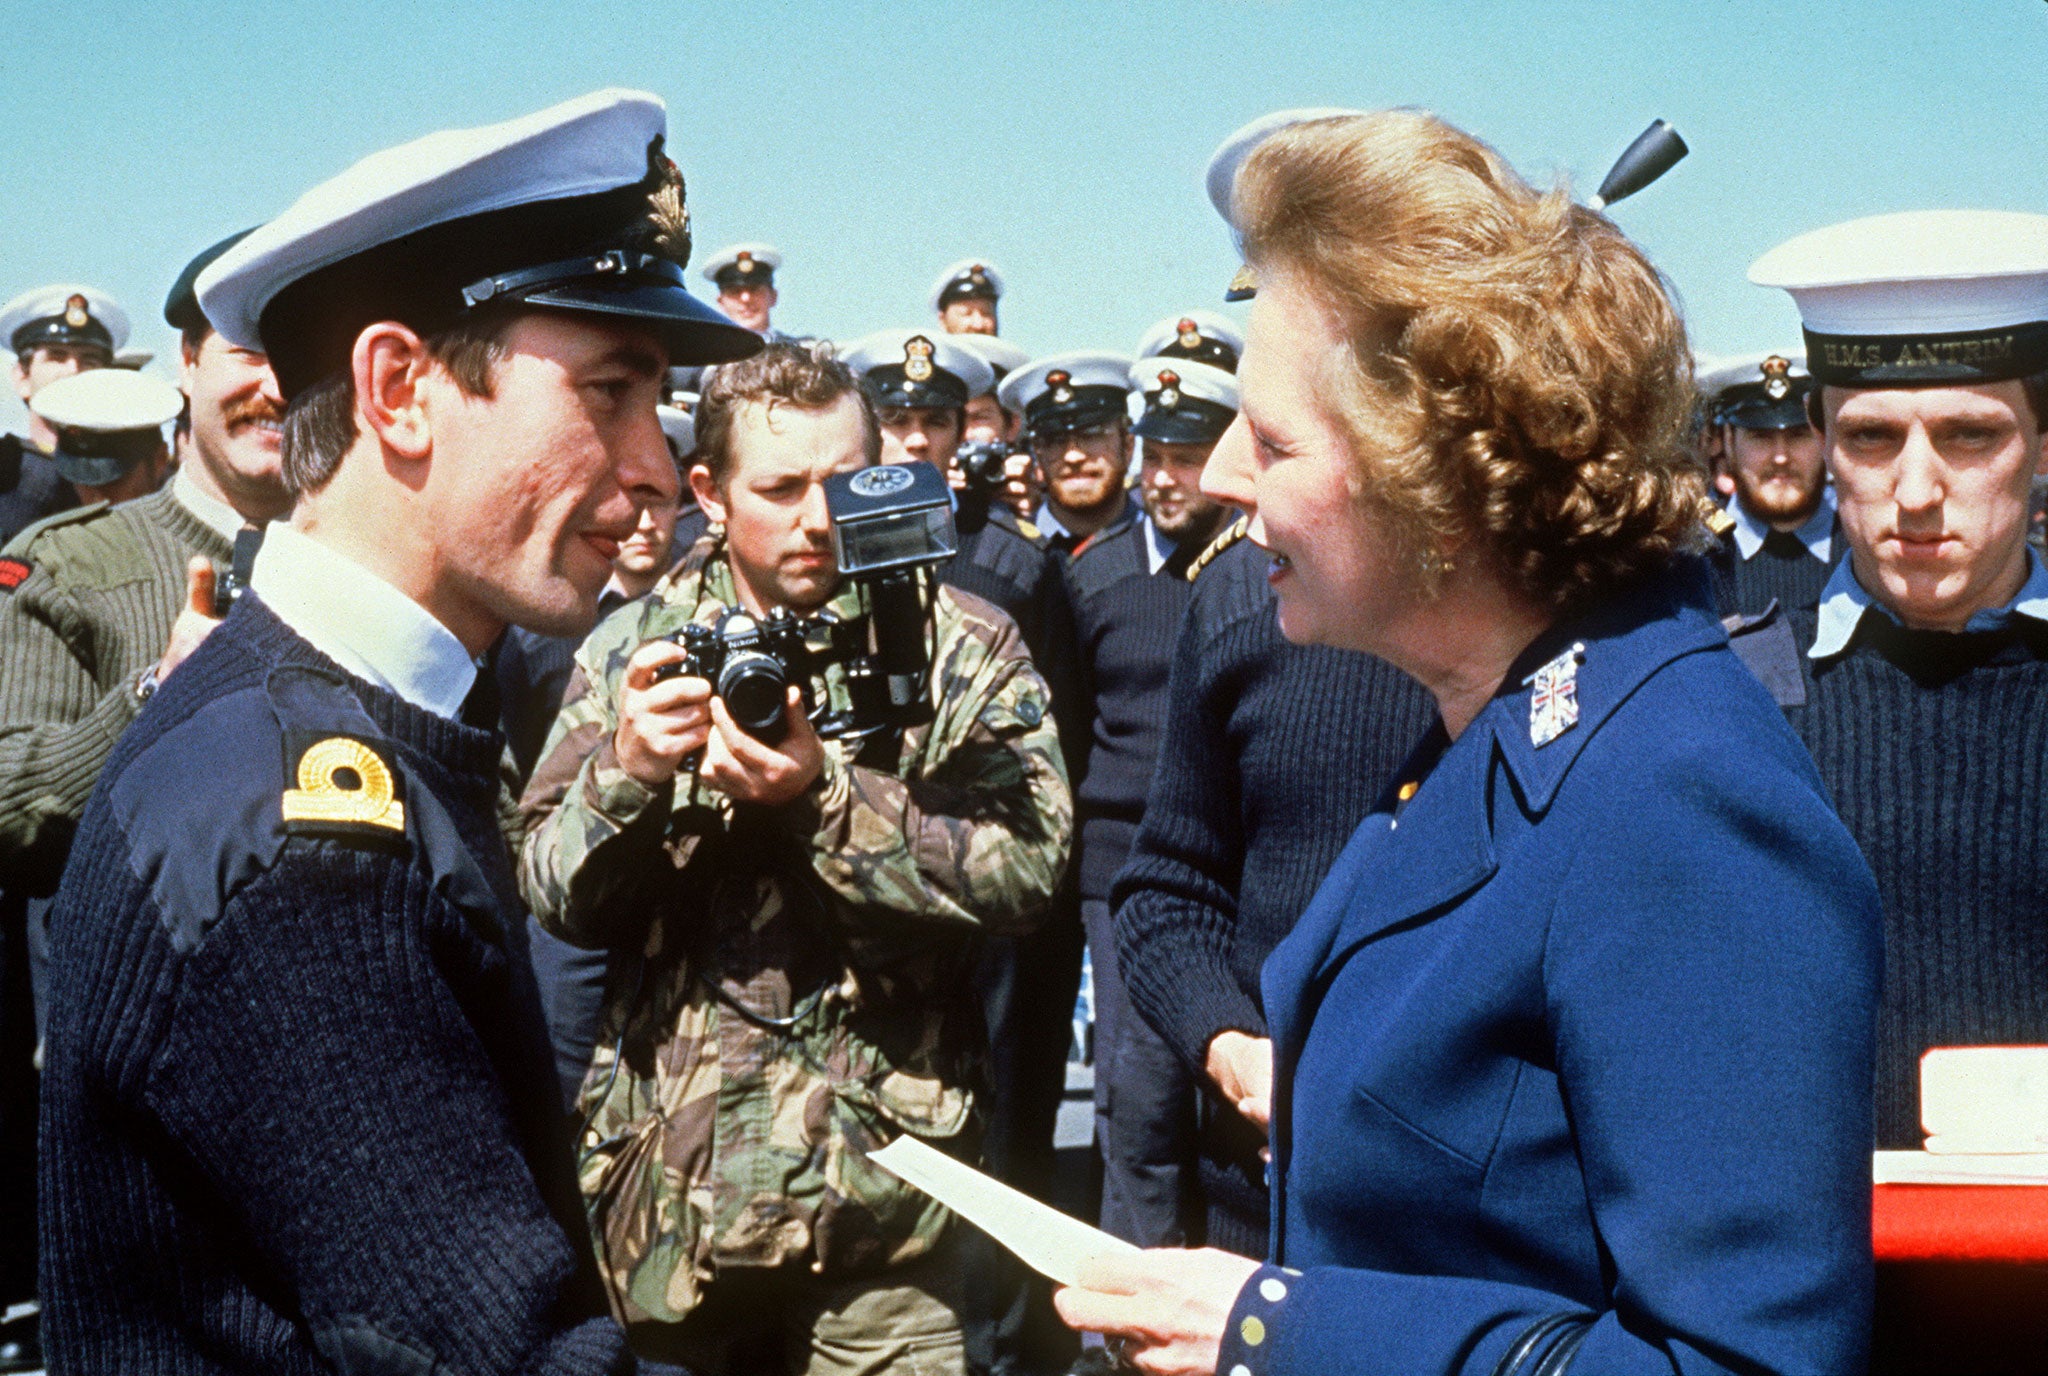 British Prime Minister Margaret Thatcher meets personnel aboard the HMS Antrim 08 January 1983 during her five-day visit to the Falkand Islands.